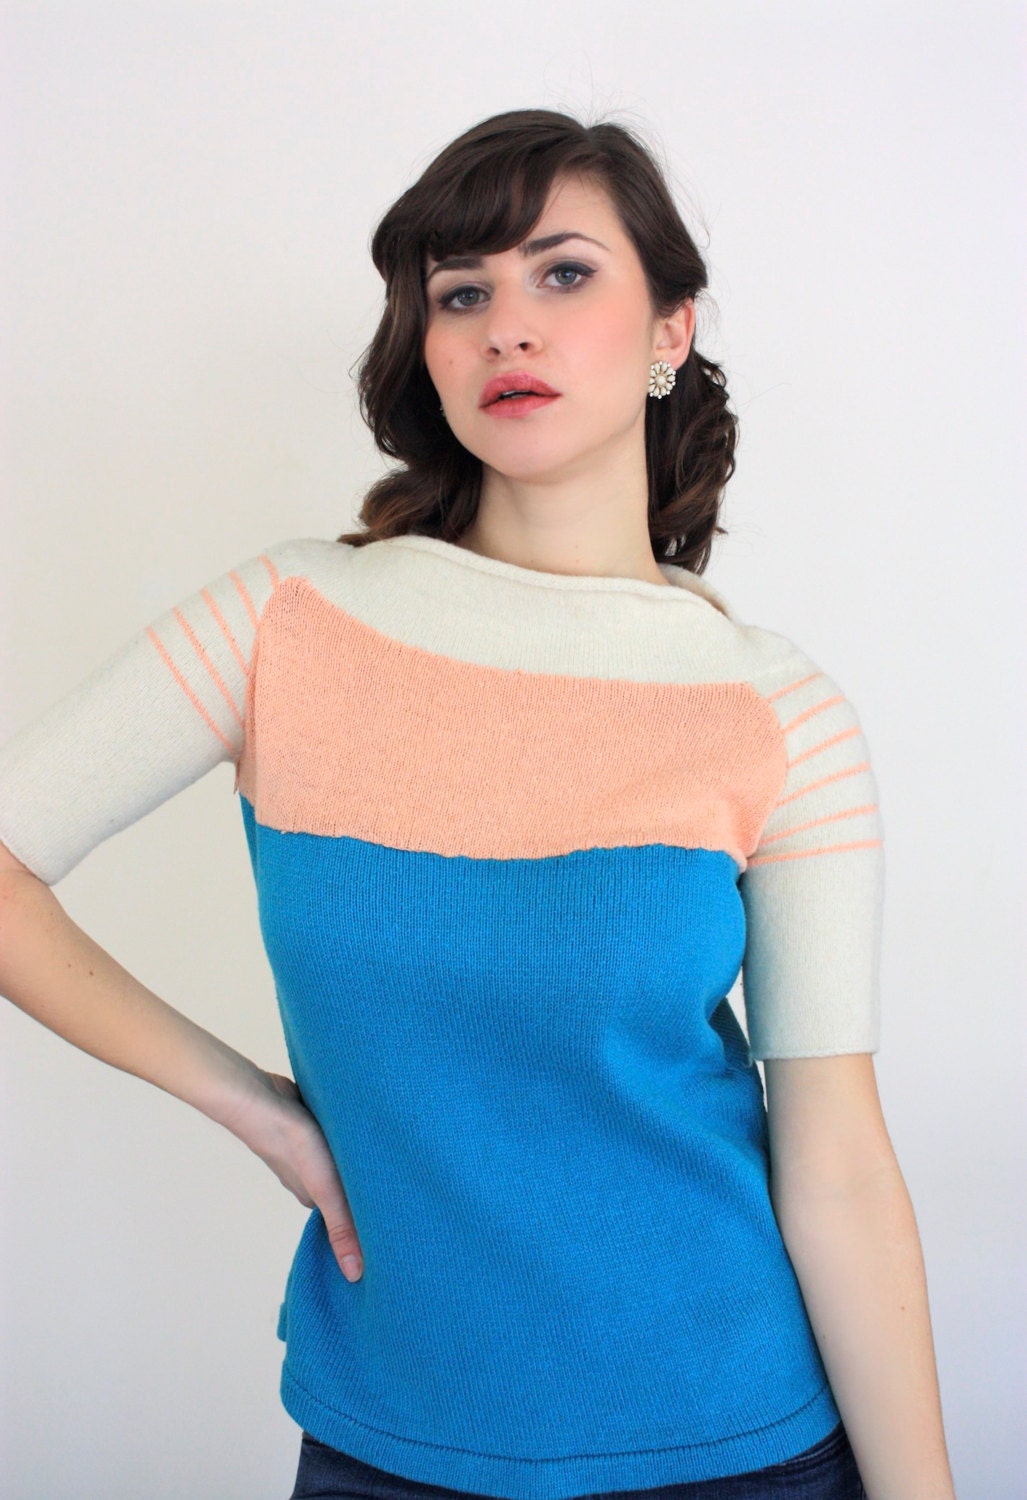 Vintage 1960's Coral Cream and Teal Colorblock Boat Neck Short Sleeve Knit Sweater